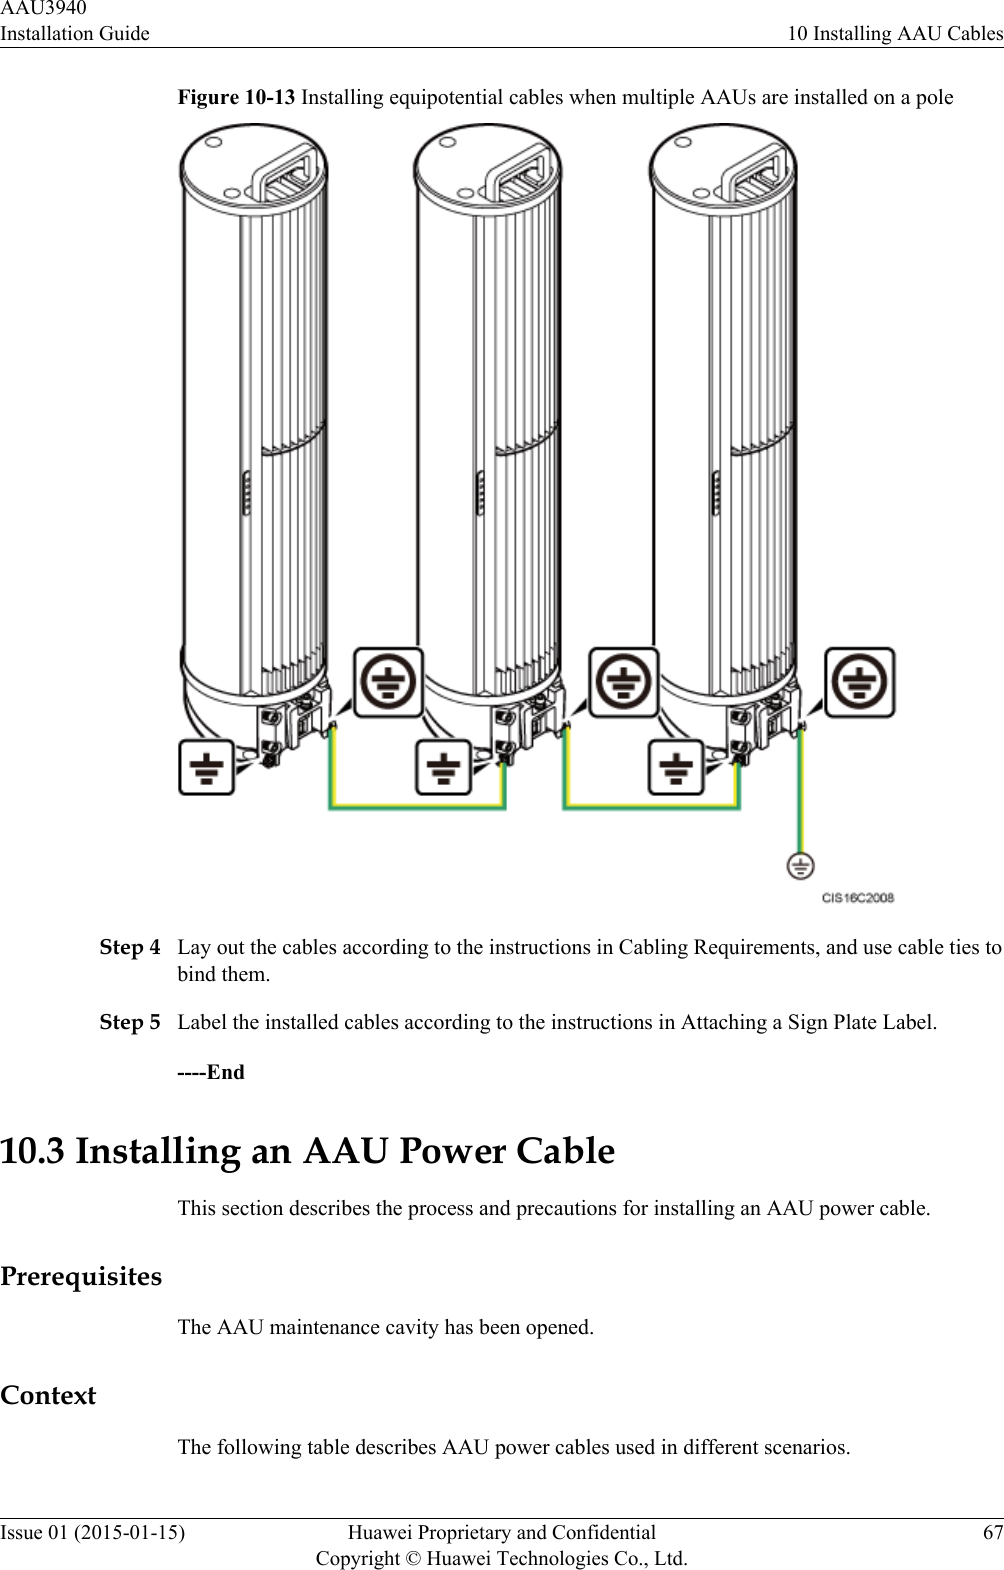 Figure 10-13 Installing equipotential cables when multiple AAUs are installed on a poleStep 4 Lay out the cables according to the instructions in Cabling Requirements, and use cable ties tobind them.Step 5 Label the installed cables according to the instructions in Attaching a Sign Plate Label.----End10.3 Installing an AAU Power CableThis section describes the process and precautions for installing an AAU power cable.PrerequisitesThe AAU maintenance cavity has been opened.ContextThe following table describes AAU power cables used in different scenarios.AAU3940Installation Guide 10 Installing AAU CablesIssue 01 (2015-01-15) Huawei Proprietary and ConfidentialCopyright © Huawei Technologies Co., Ltd.67